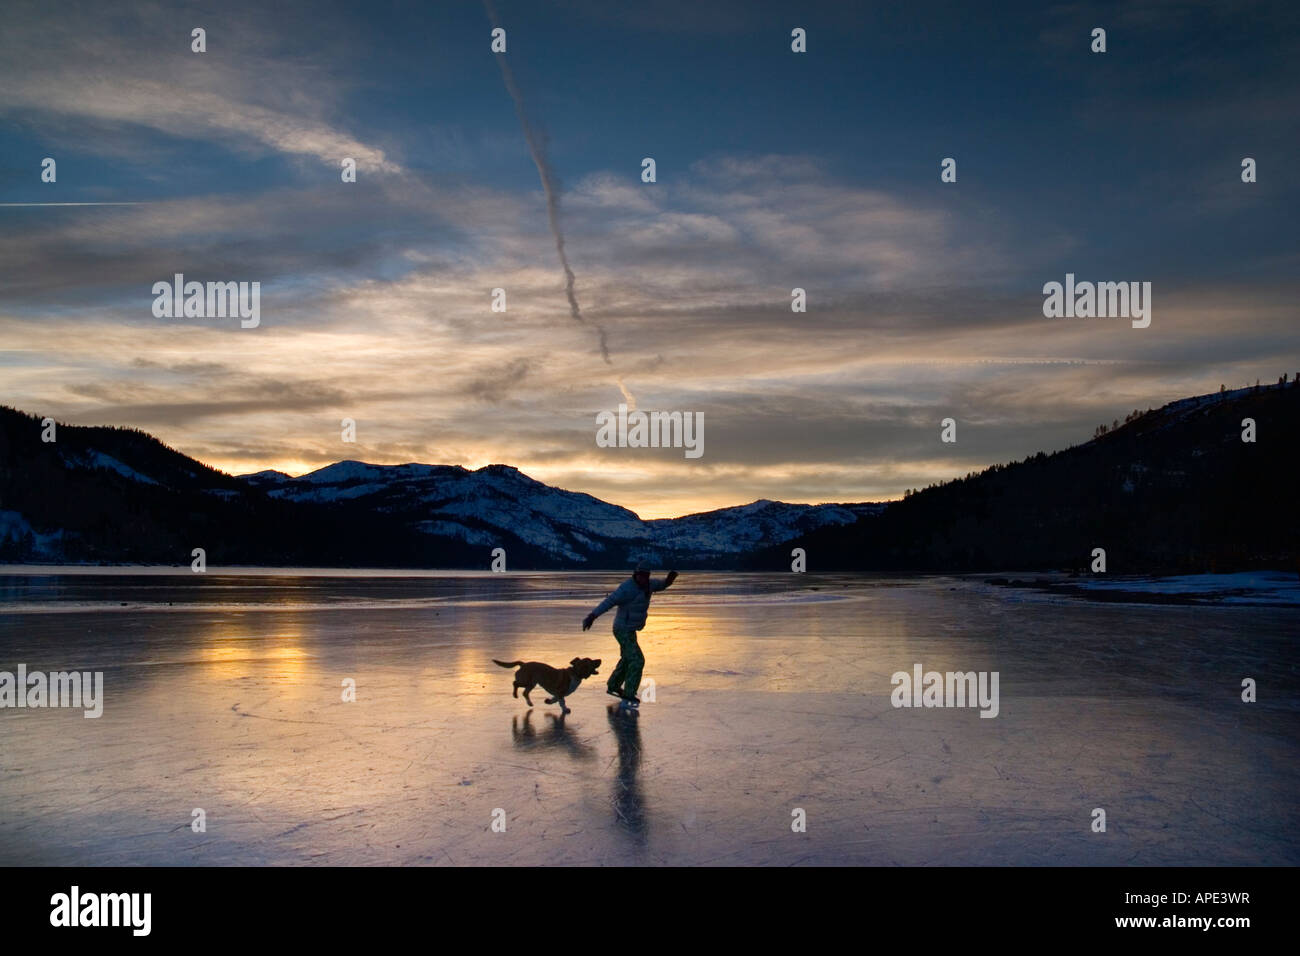 A silhouette of a woman ice skating with her dog on Donner Lake California at sunset. Stock Photo